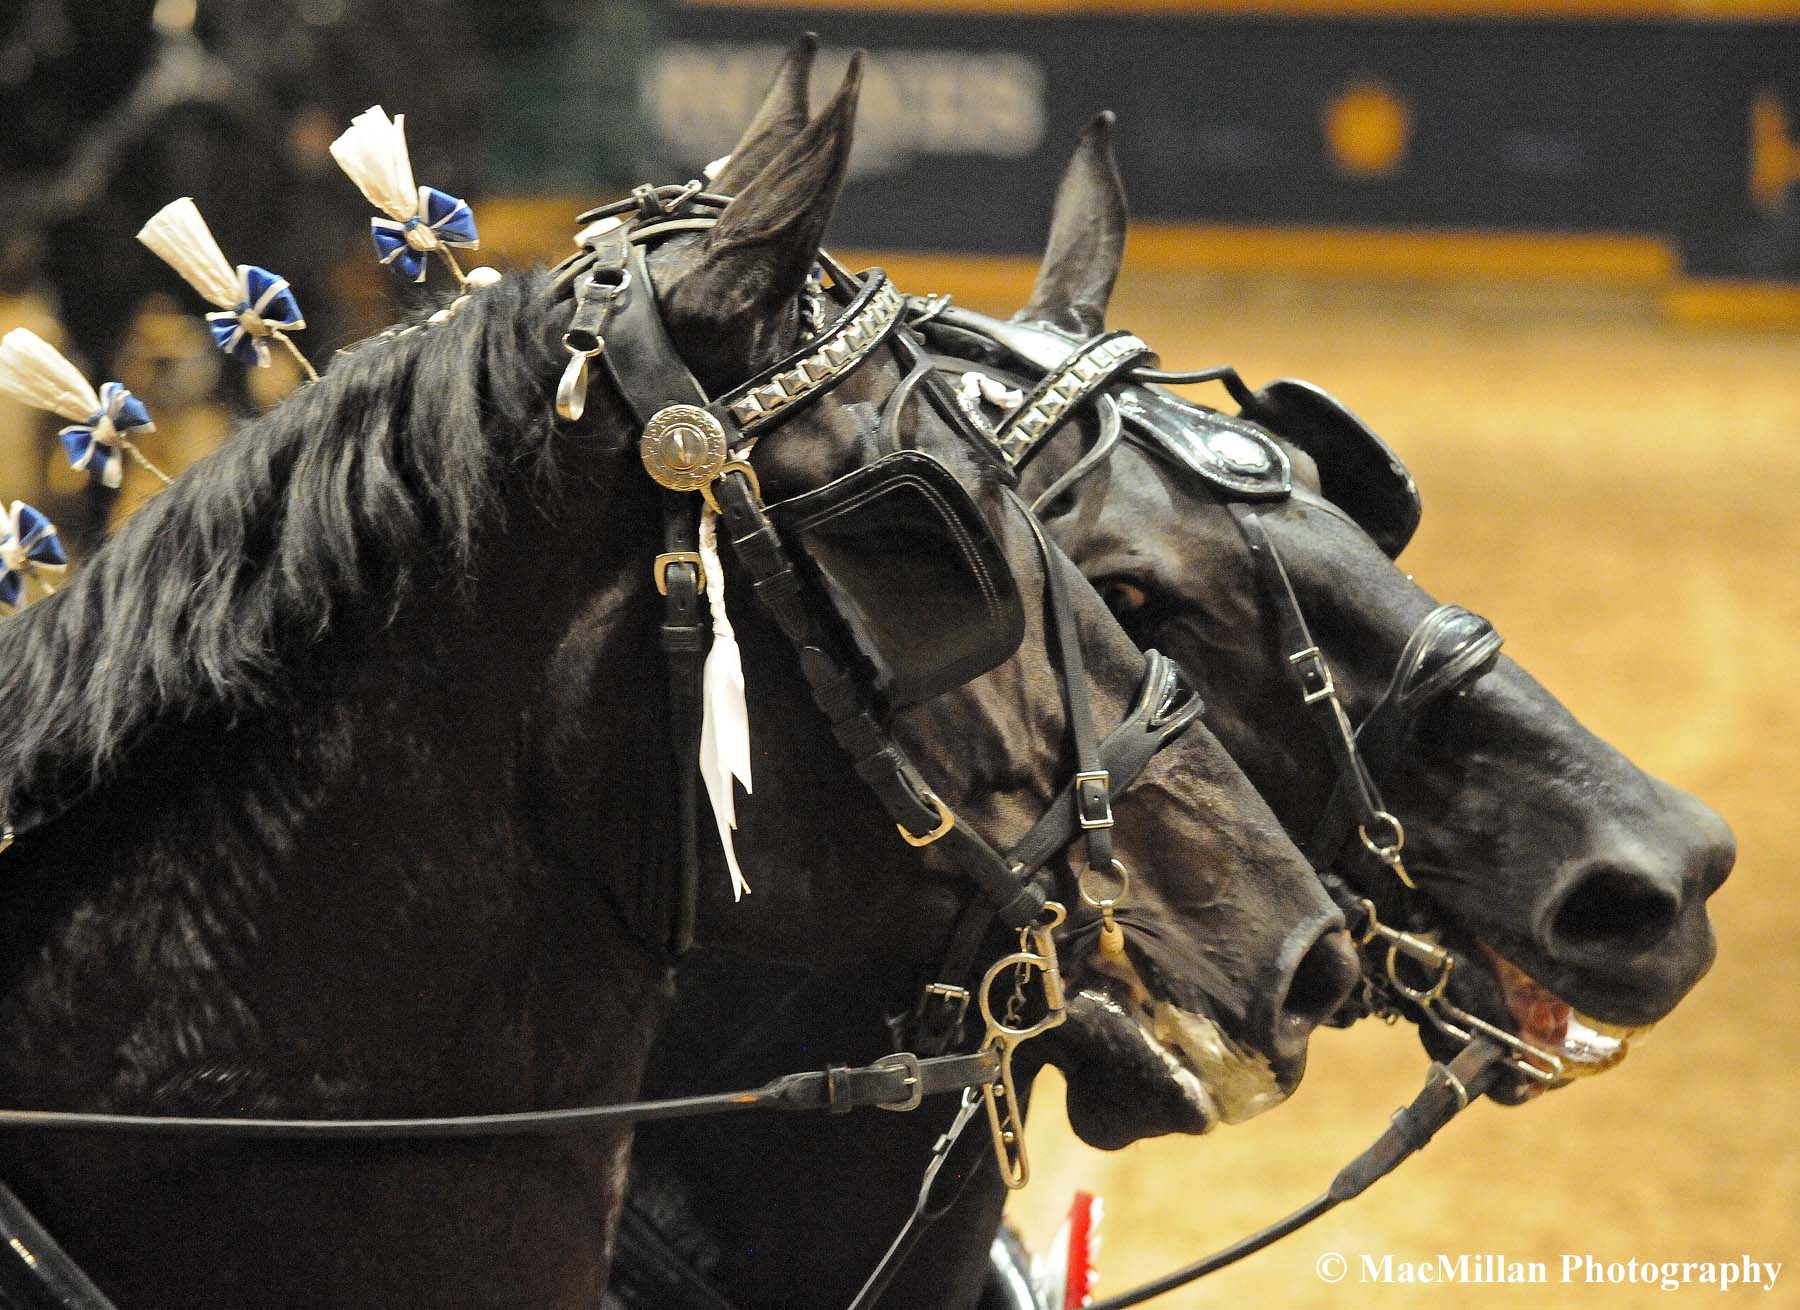 Photo 23 - Photo 4 – The trusty lead horses, Tory and Queen, of the champion All Star Percheron hitch at the 2015 Royal Winter Fair in TorontoPhoto by Kim MacMillan/MacMillan Photography